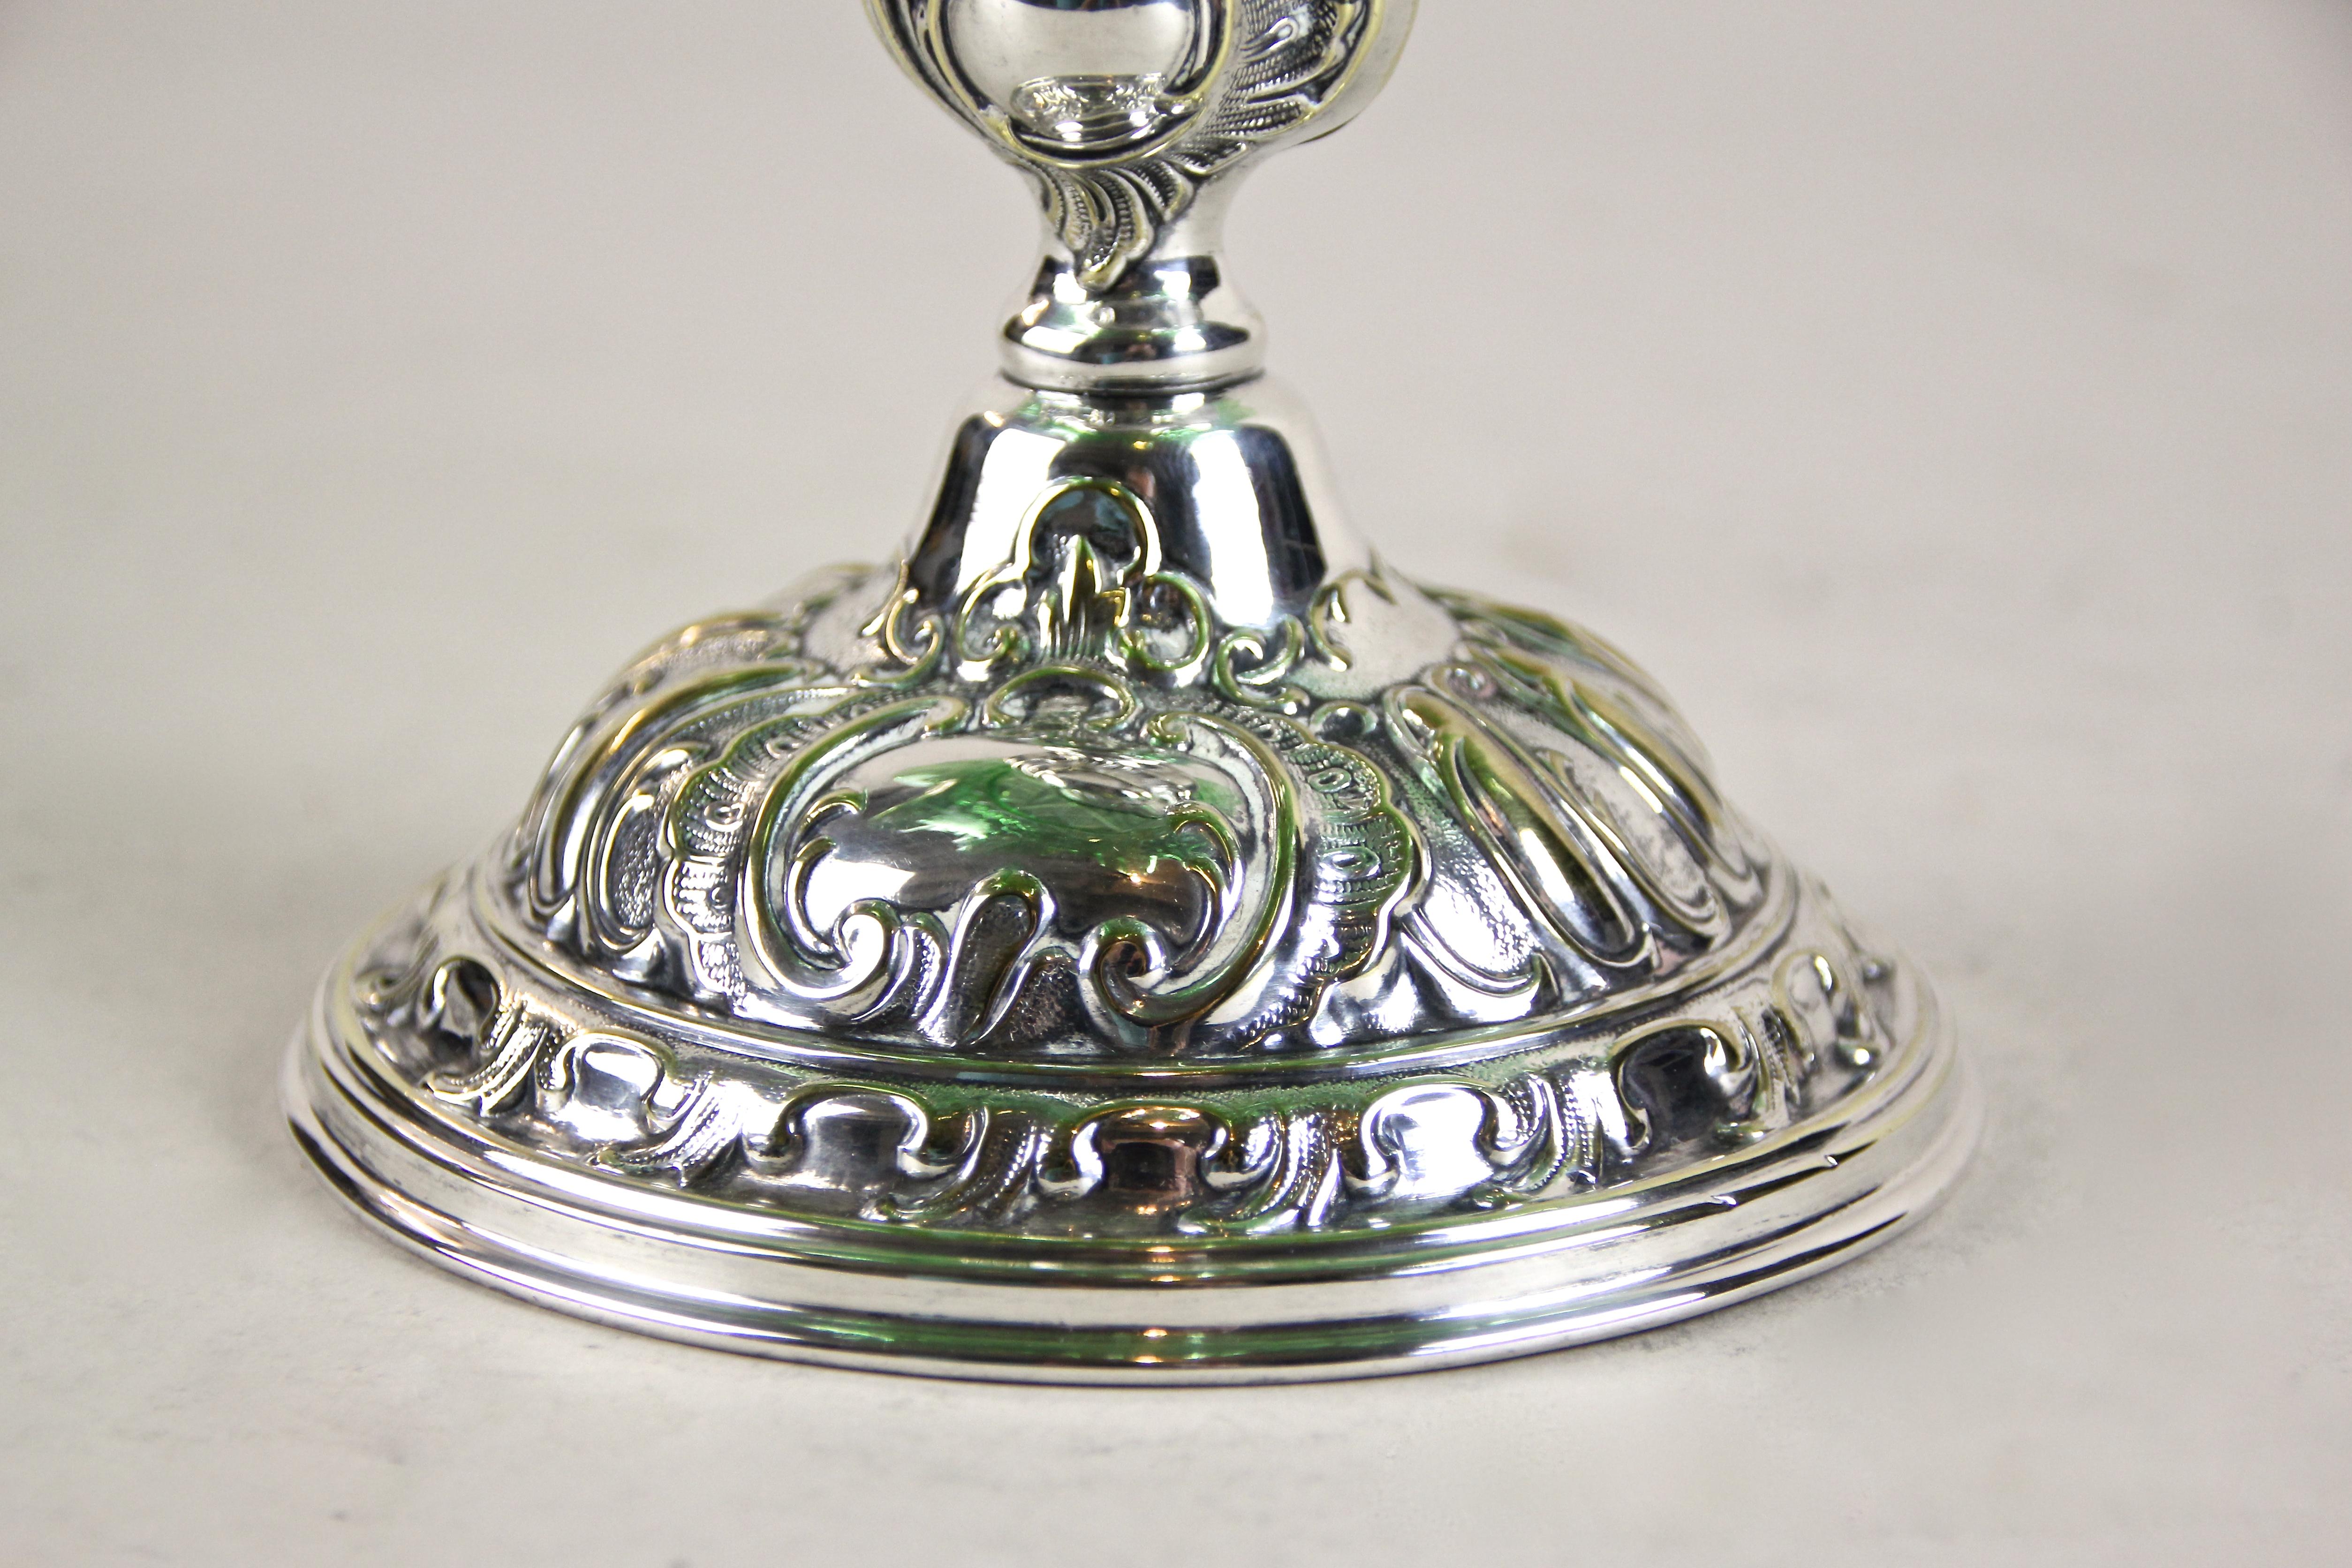 Delightful silvered Art Nouveau centerpiece with ruffled glass bowl from Austria, circa 1900. The beautiful green shining mouth blown glass bowl sits on a silver plated artfully made brass stand showing some minimal abrasion. The extraordinary